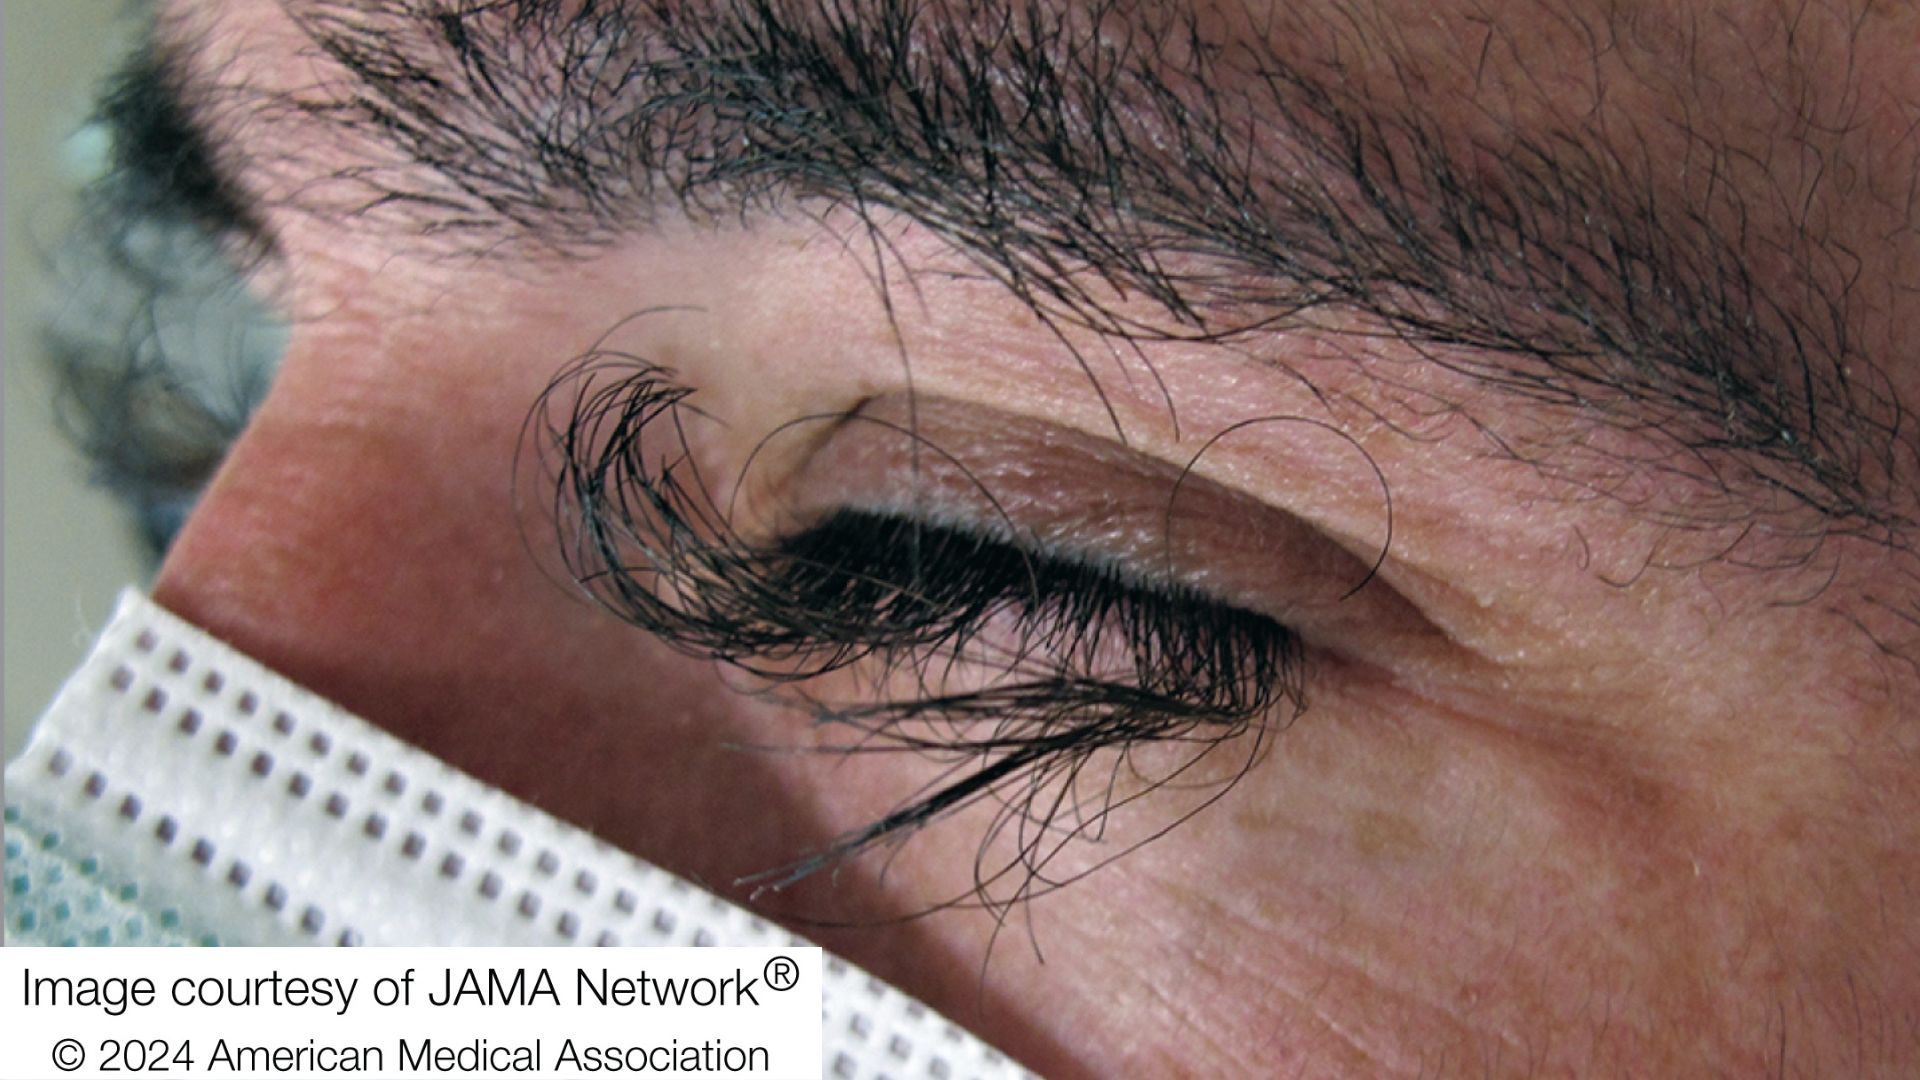 Chemo side effect caused man's eyelash growth to go haywire